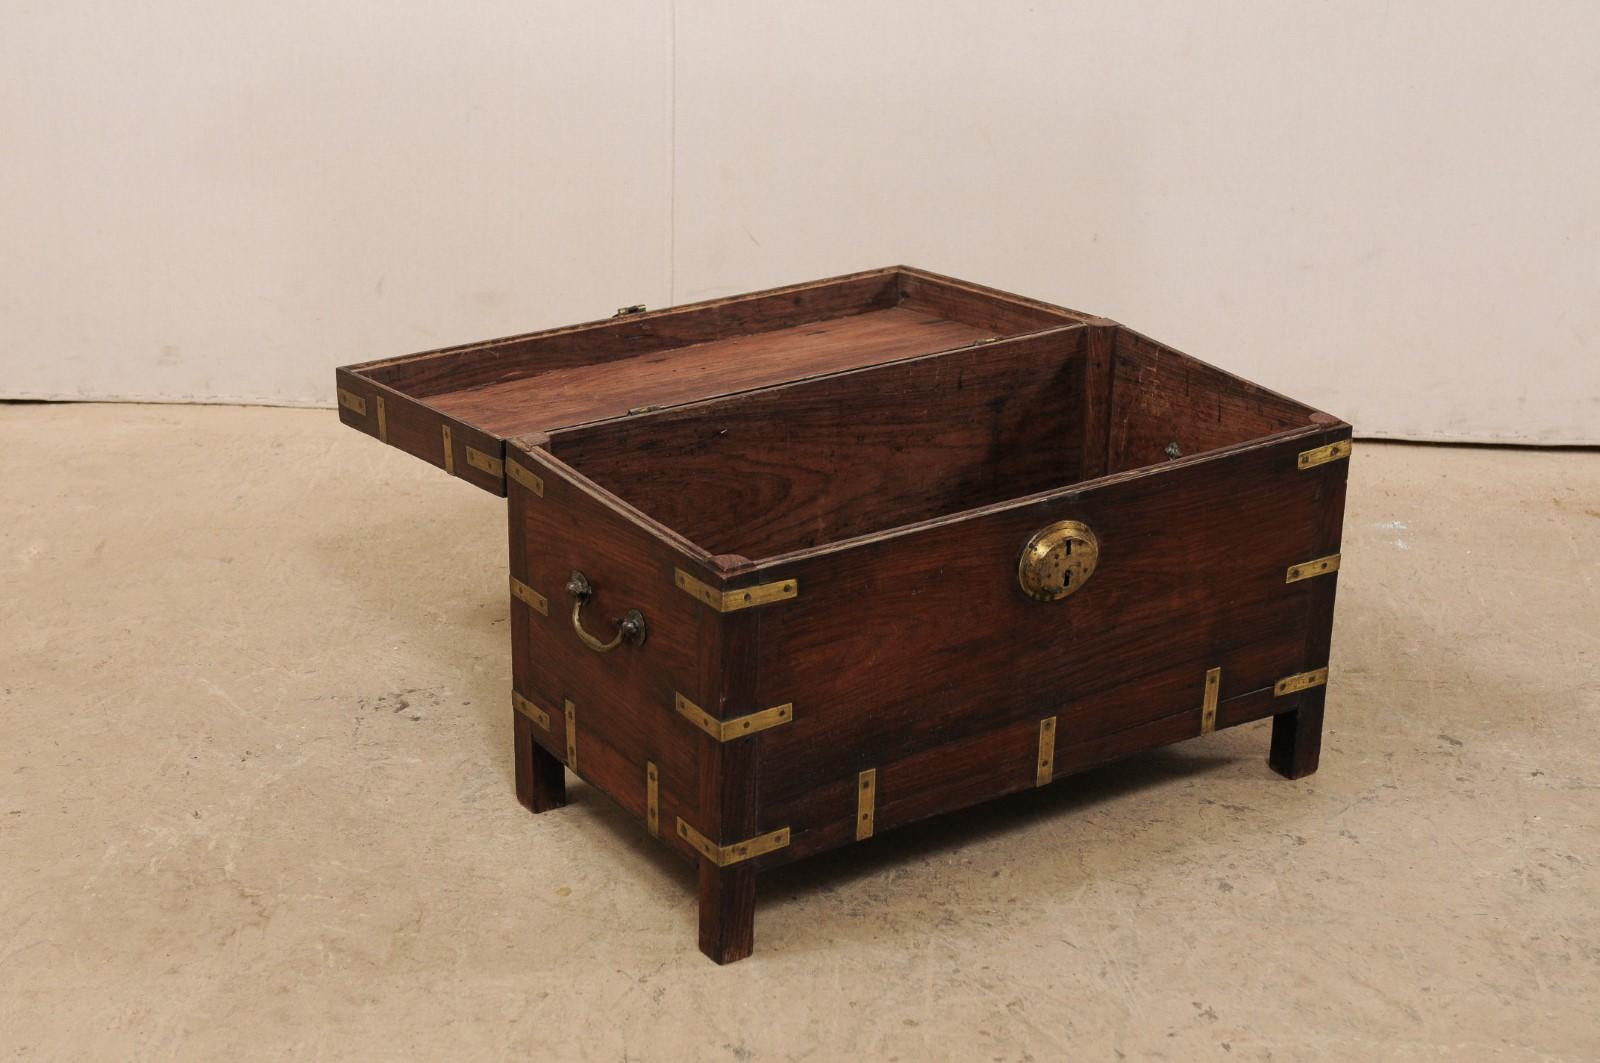 20th Century 1920s British Colonial Trunk of Rosewood and Brass-Great Little Coffee Table